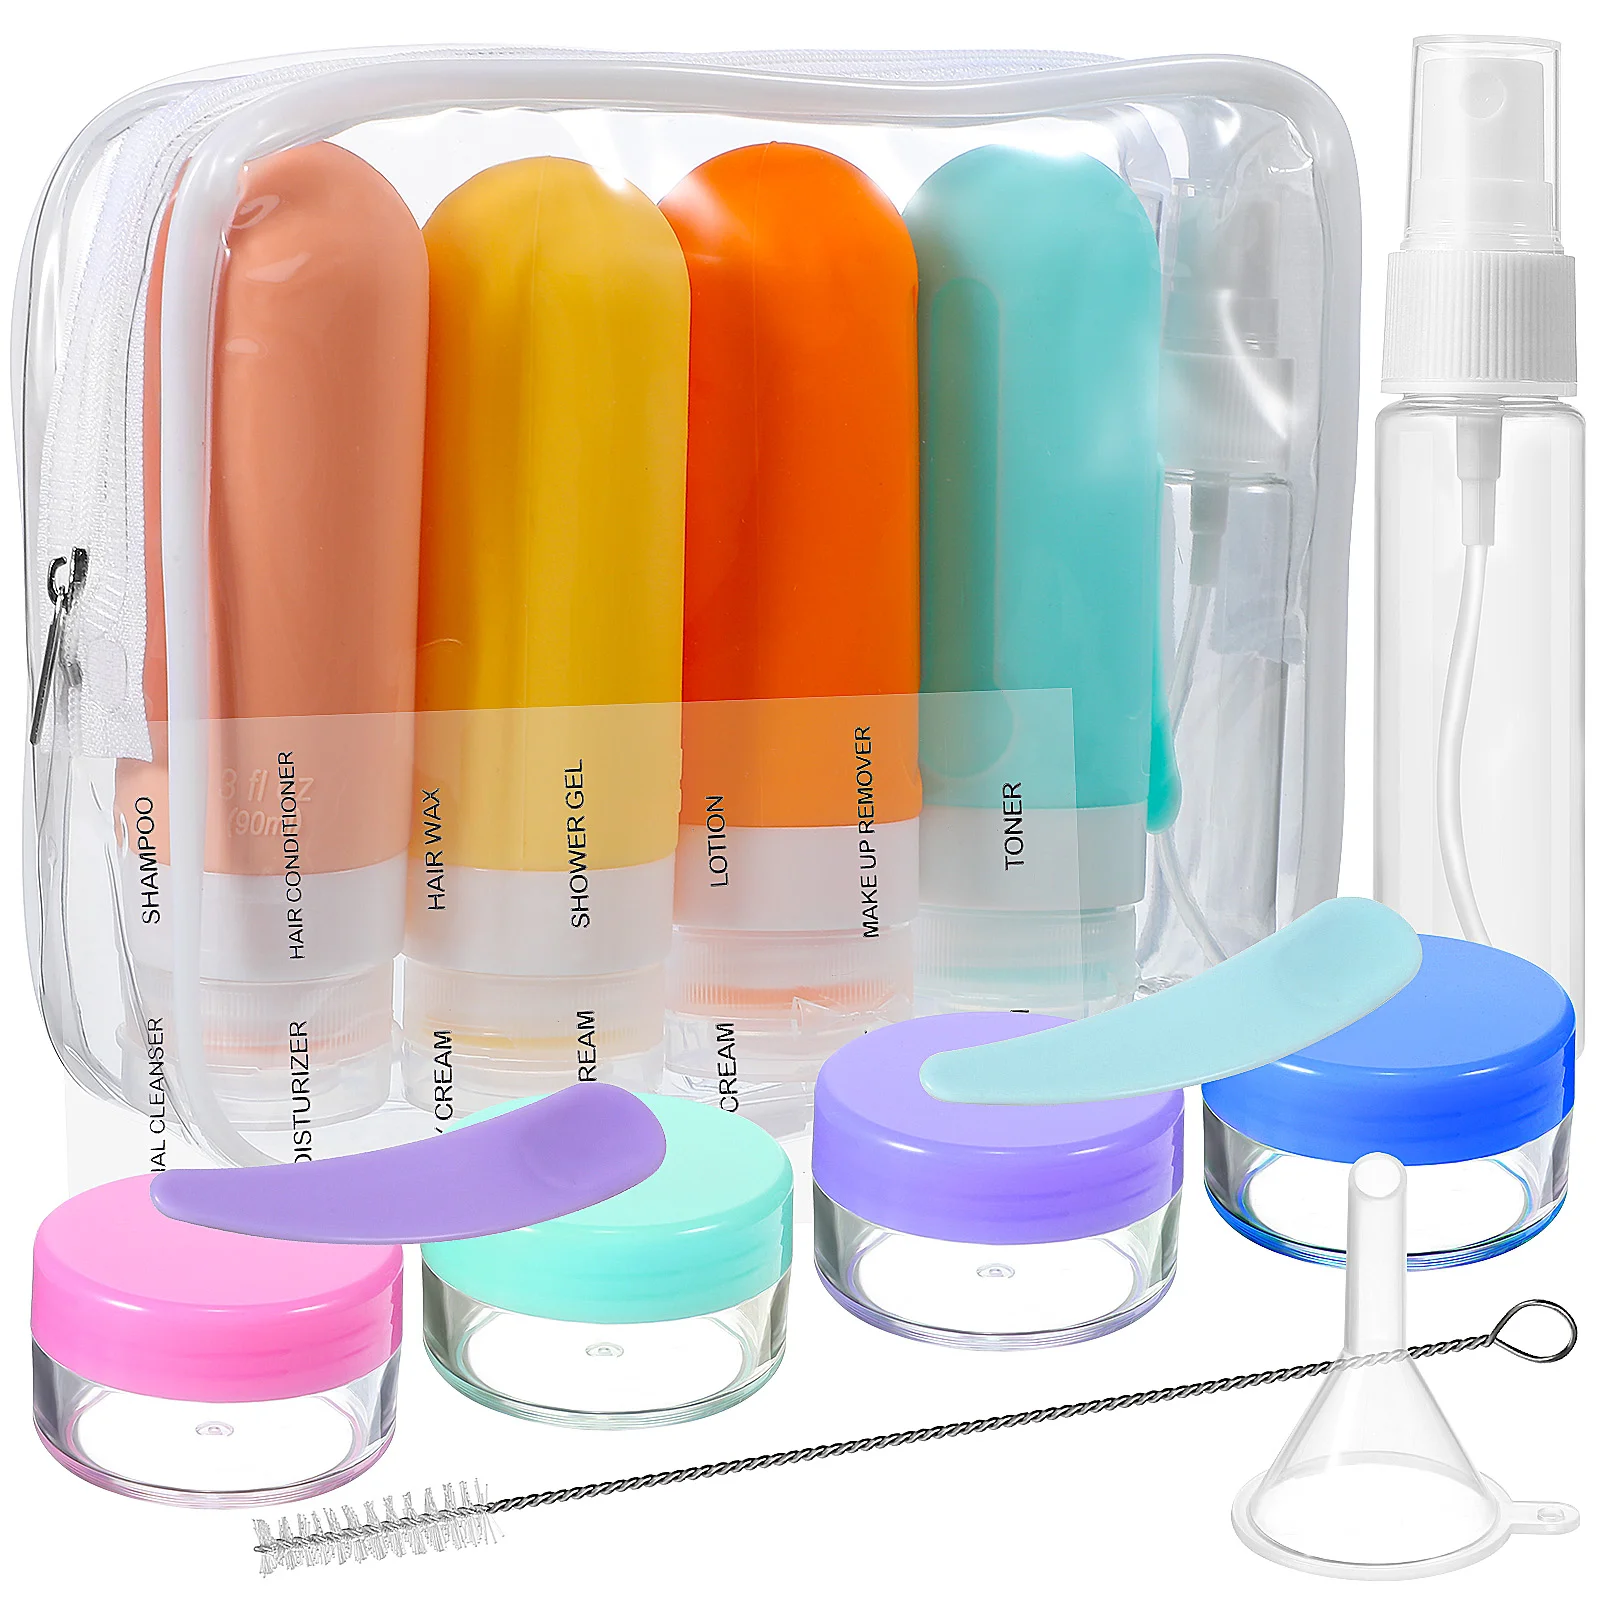 

Travel Bottles Set Travel Size Containers Silicone Shampoo and Conditioner Bottles for Toiletries(90ml)